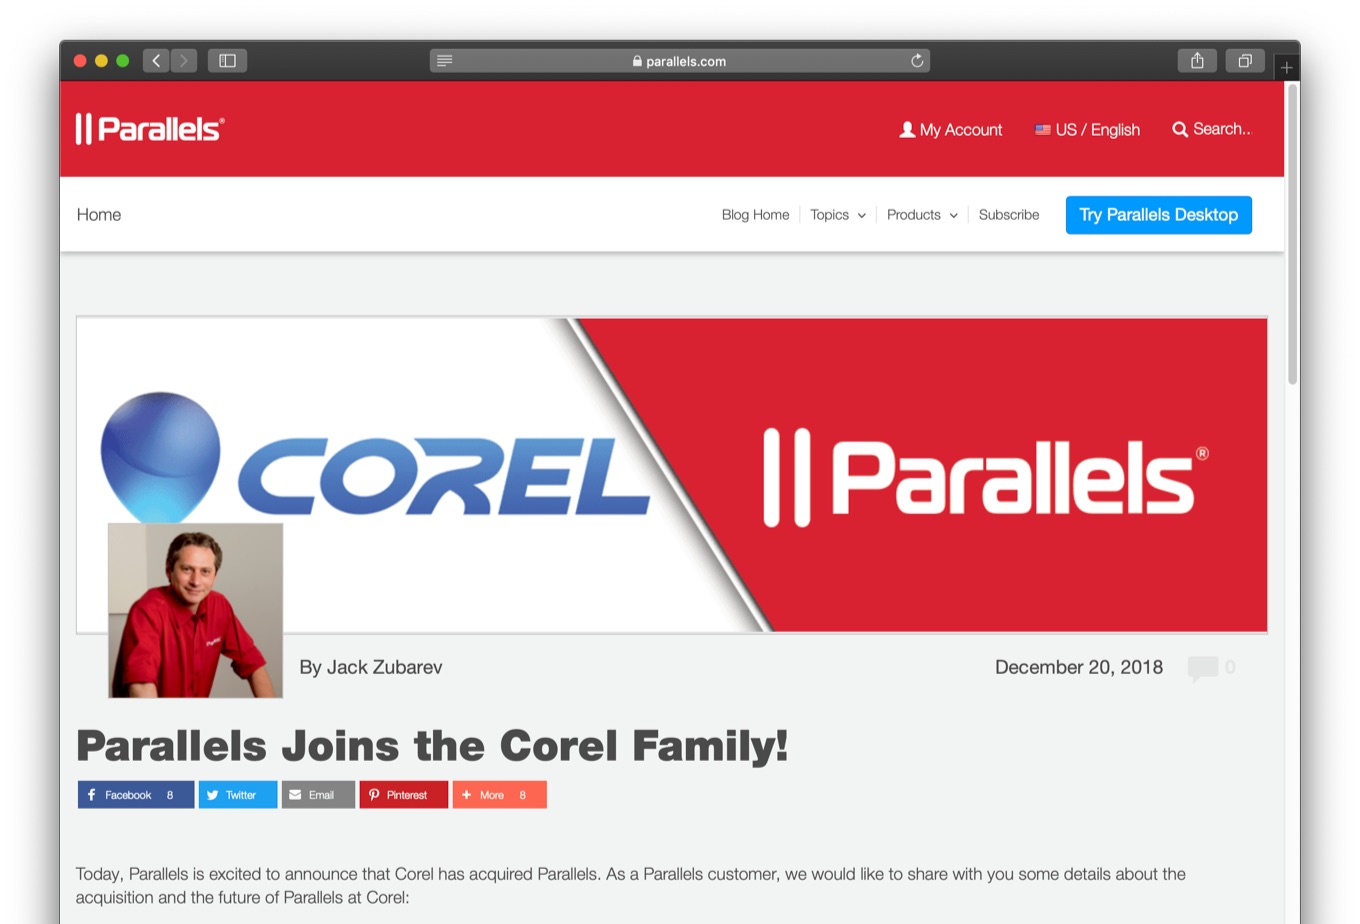 Parallels Joins the Corel Family!